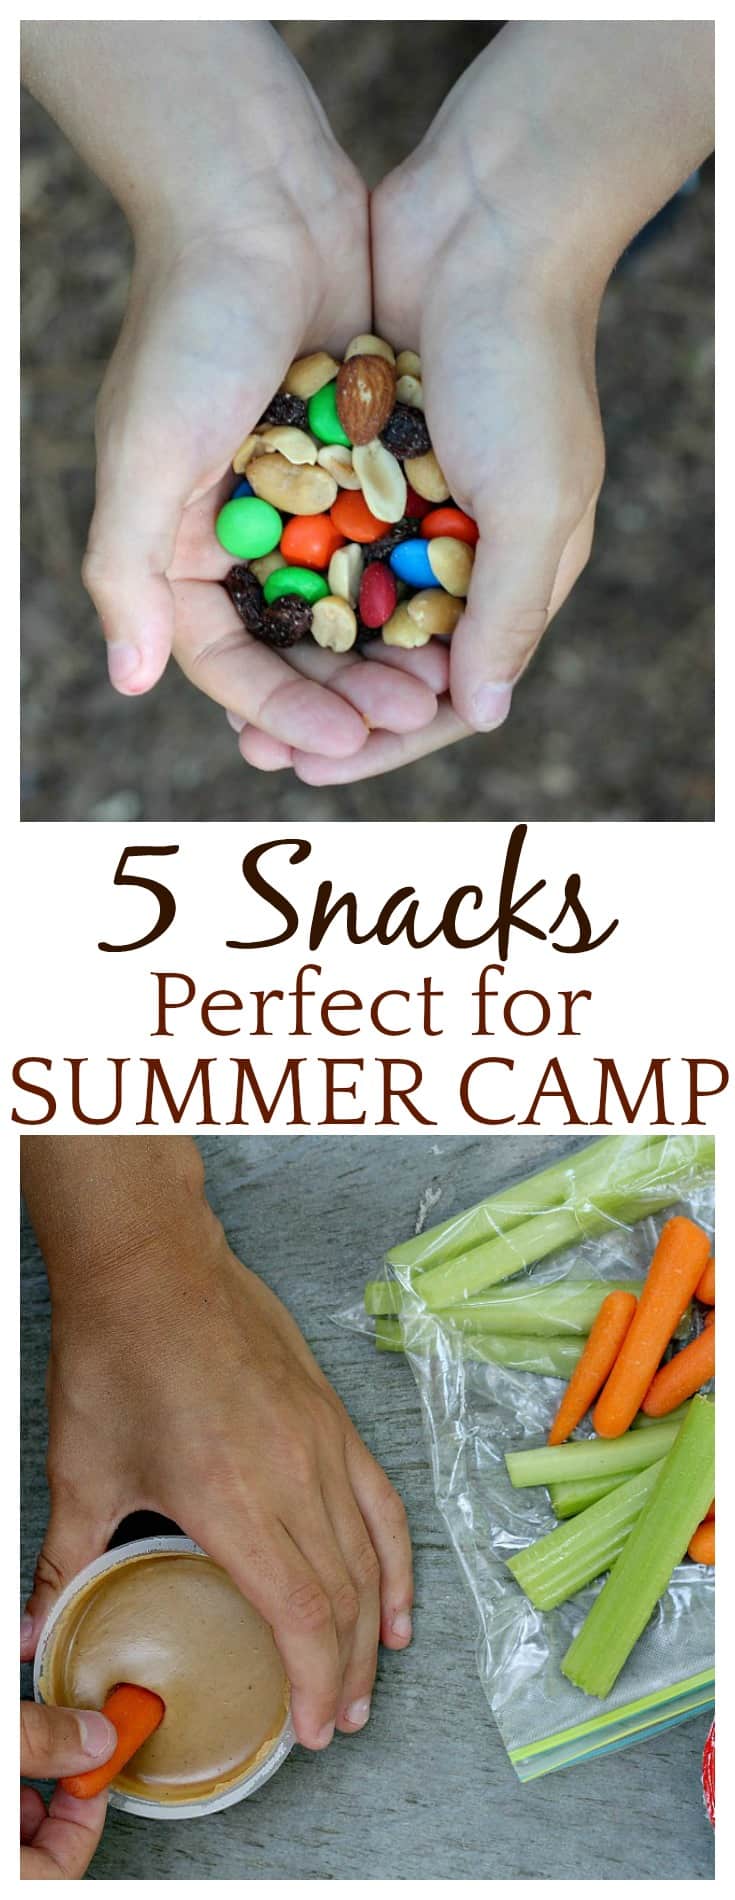 Summer camps keep kids extremely busy! Help keep heir energy levels up by packing hearty snacks that contain protein. This list contains 5 perfect summer camp snacks that your kids are sure to love! 